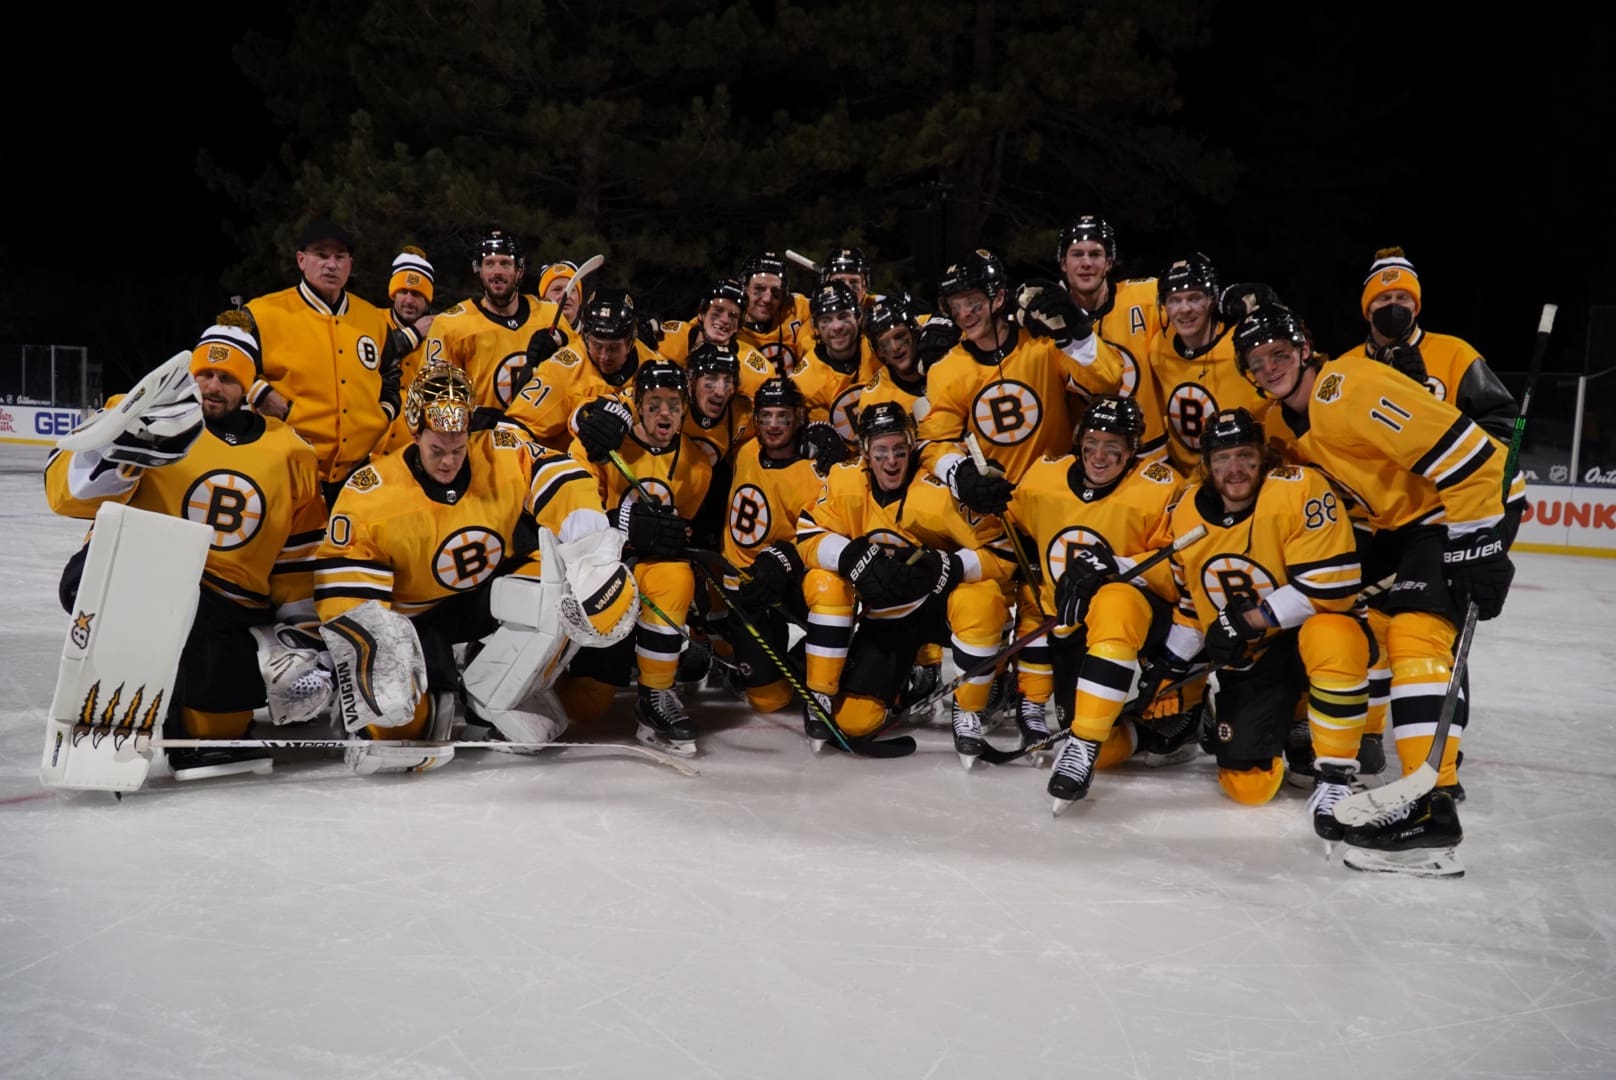 Photos: See what the Bruins' win over the Flyers in picturesque Lake Tahoe  looked like - The Boston Globe